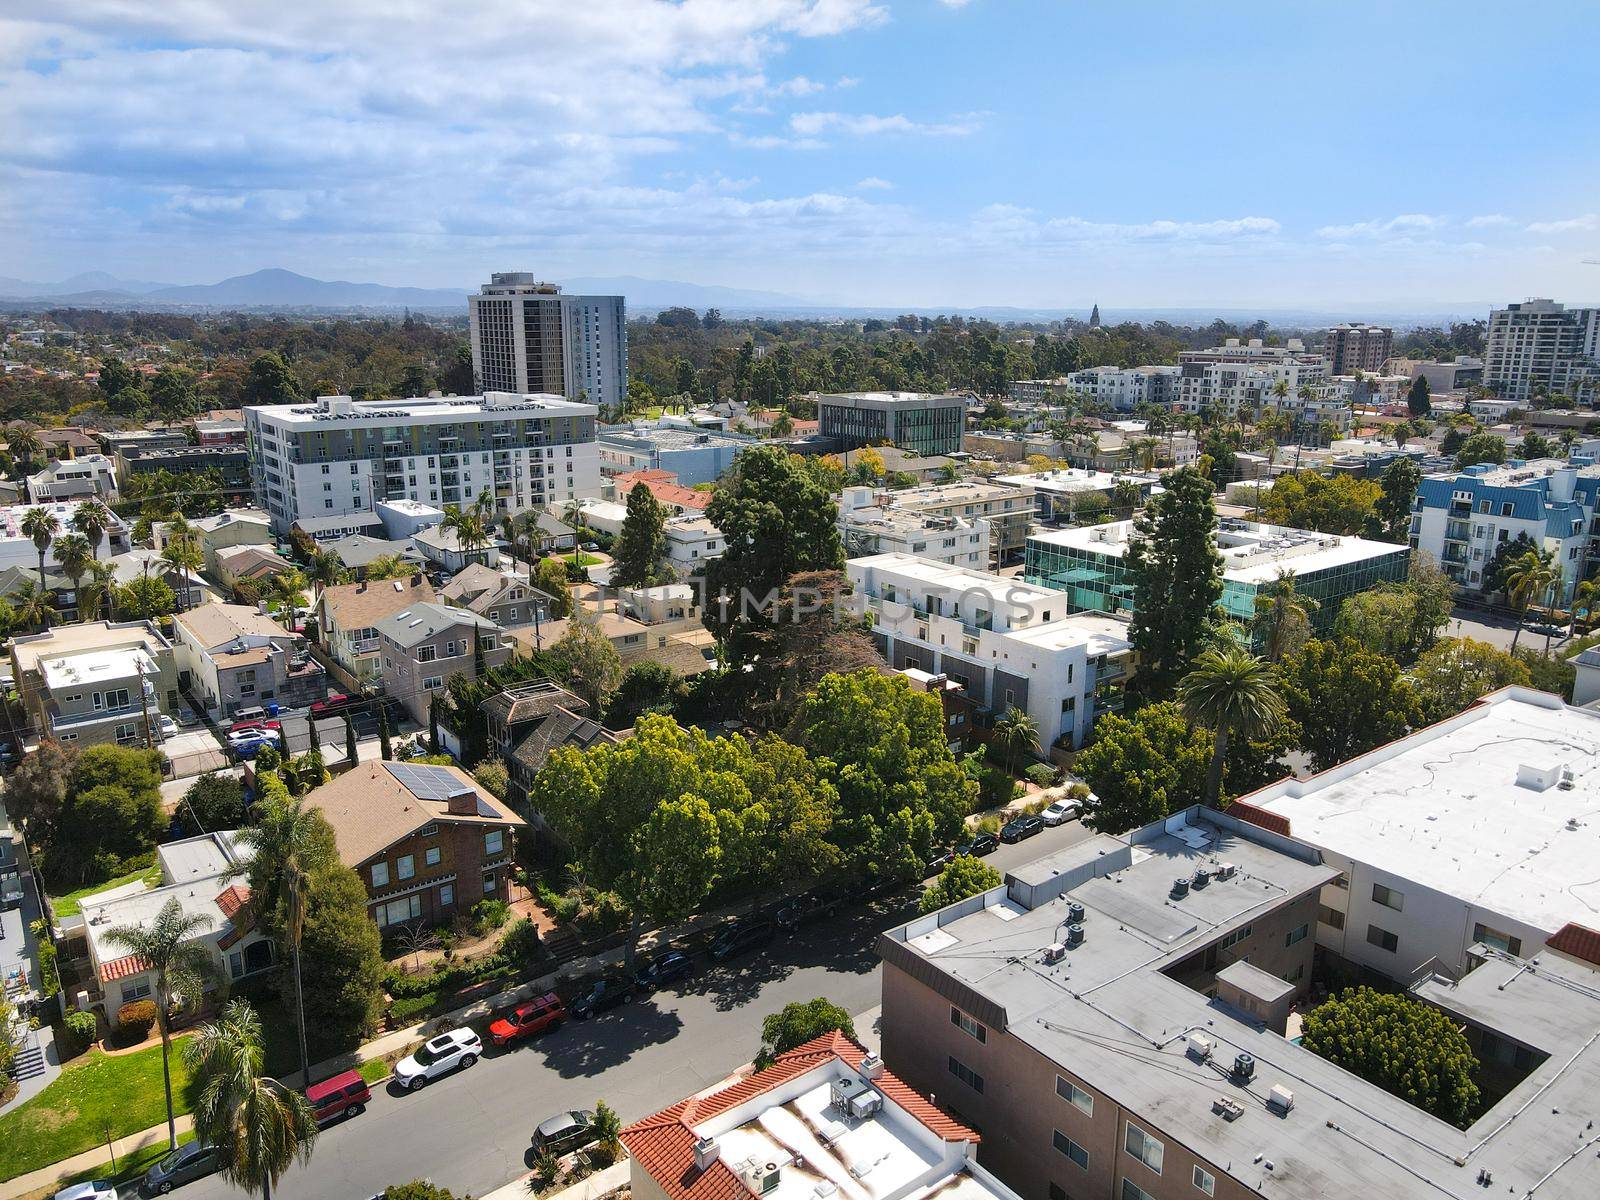 Aerial view above Hillcrest neighborhood in San Diego, California. USA